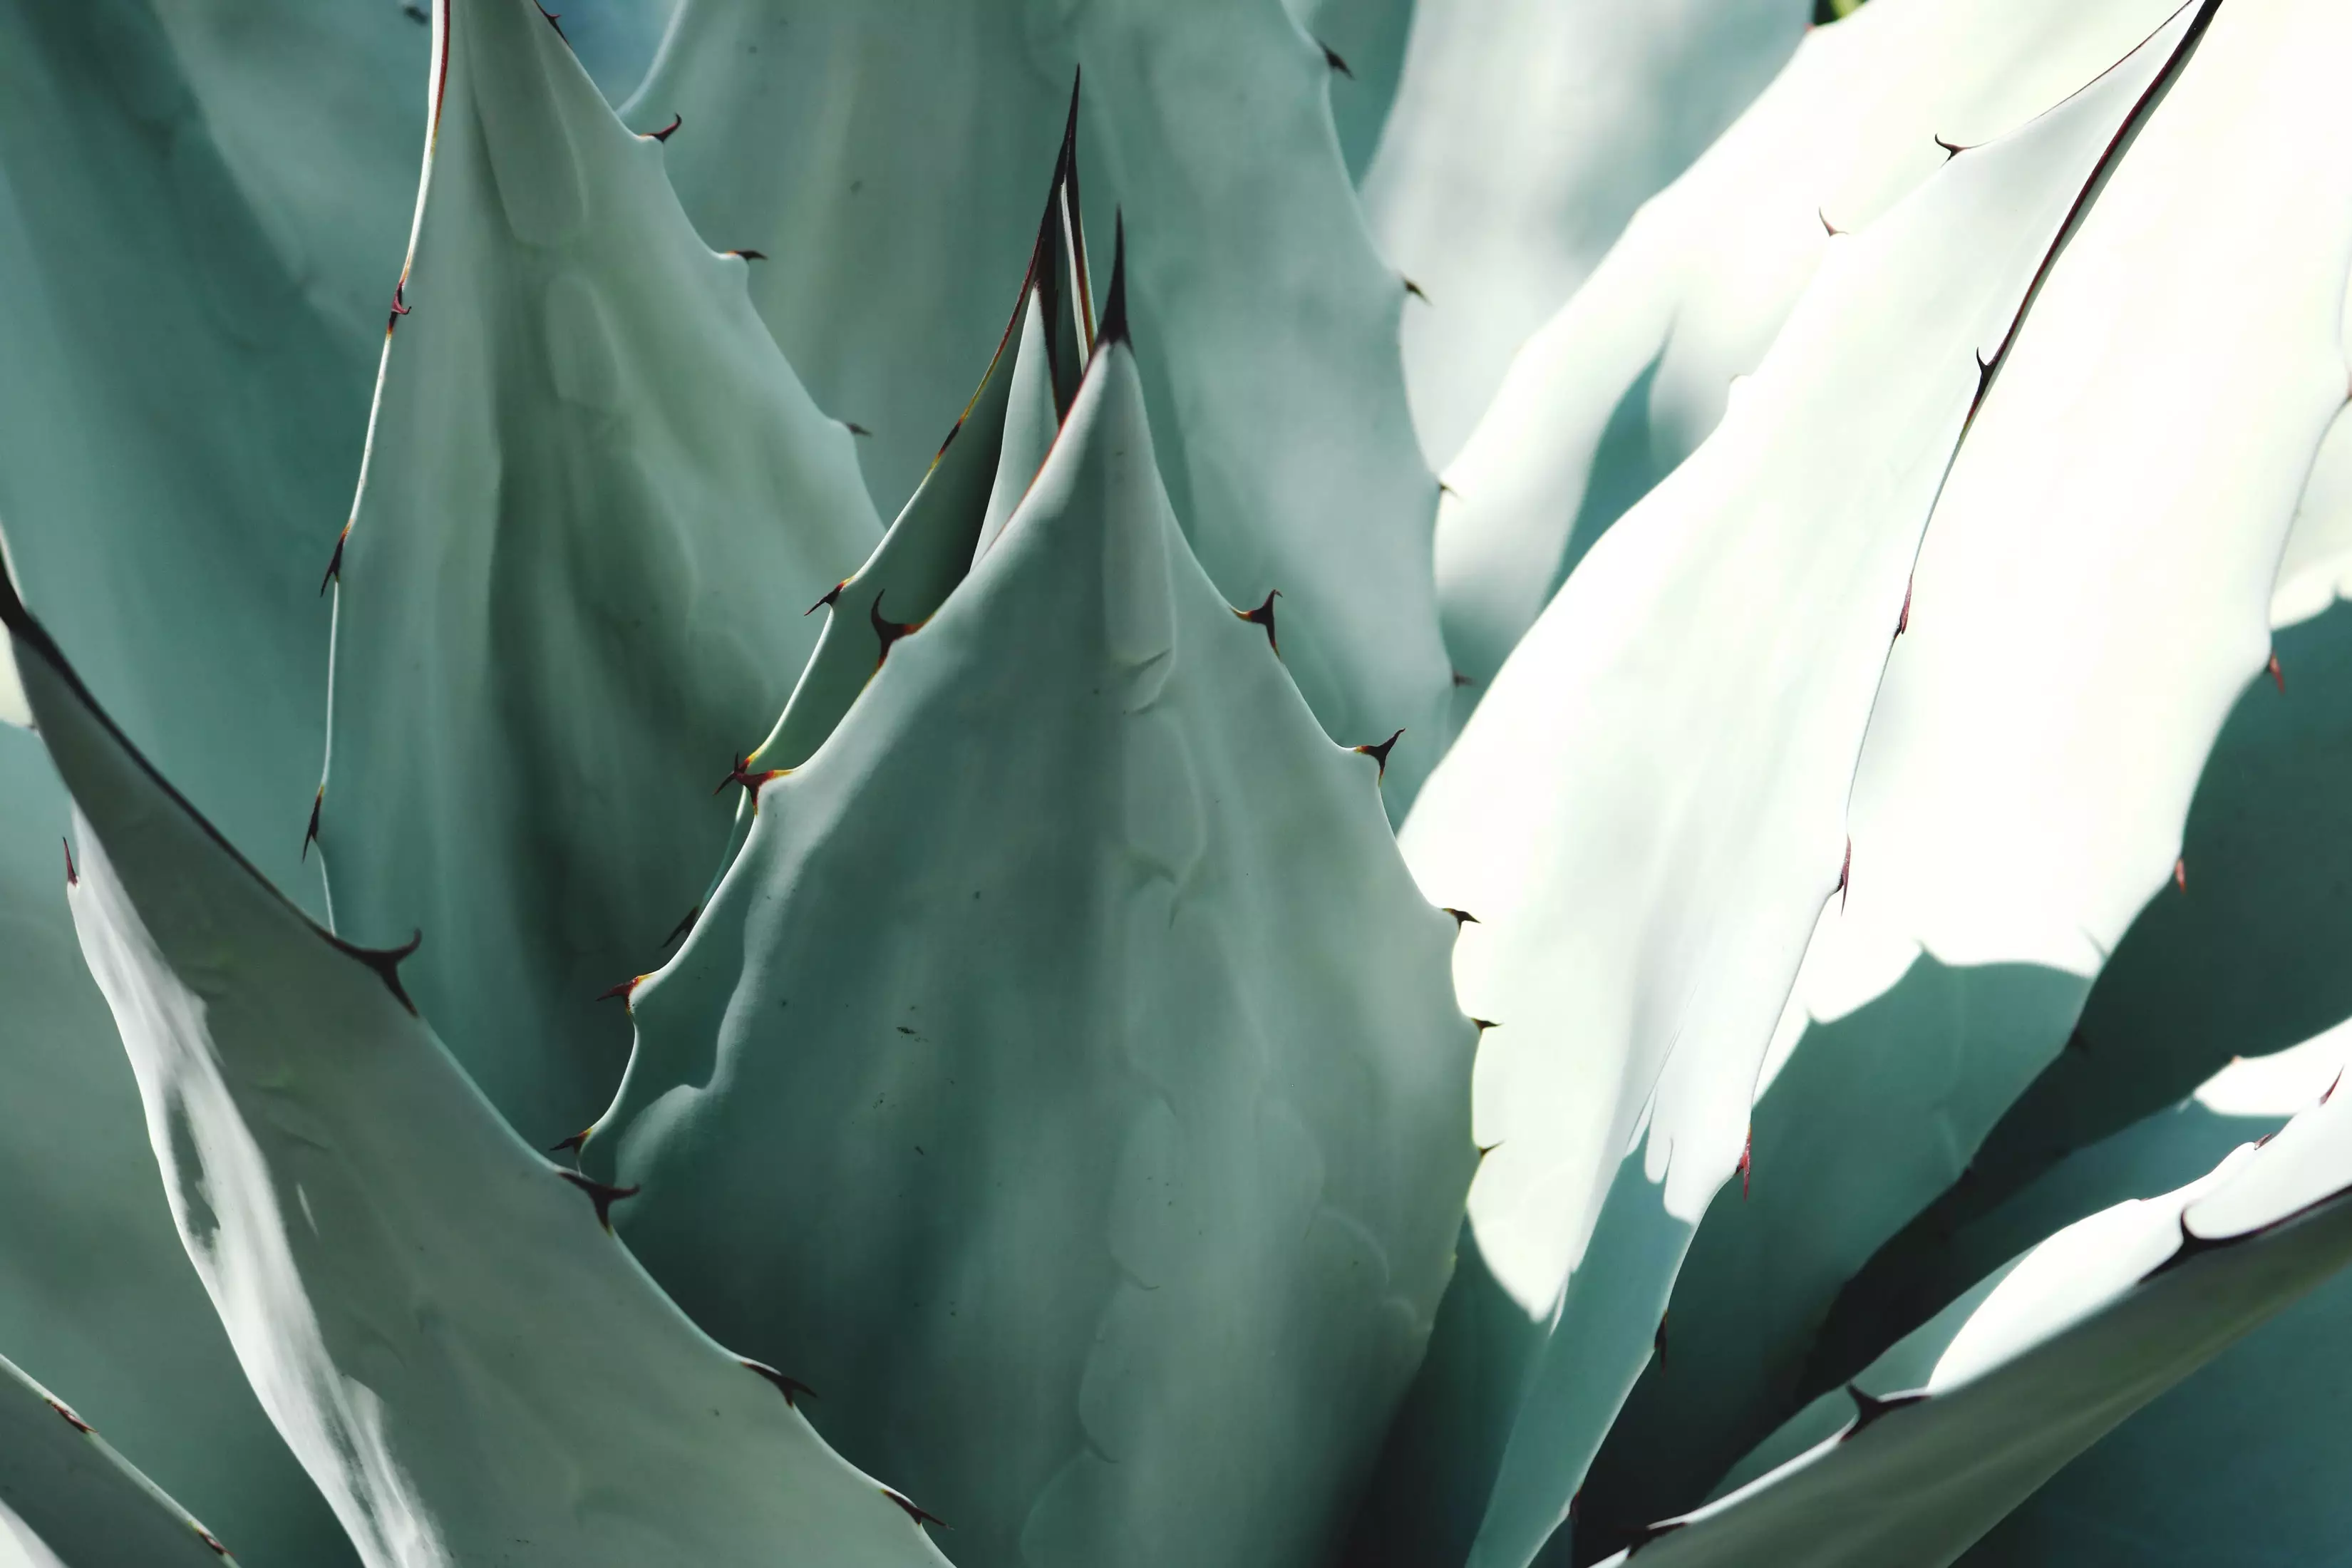 The agave plant.